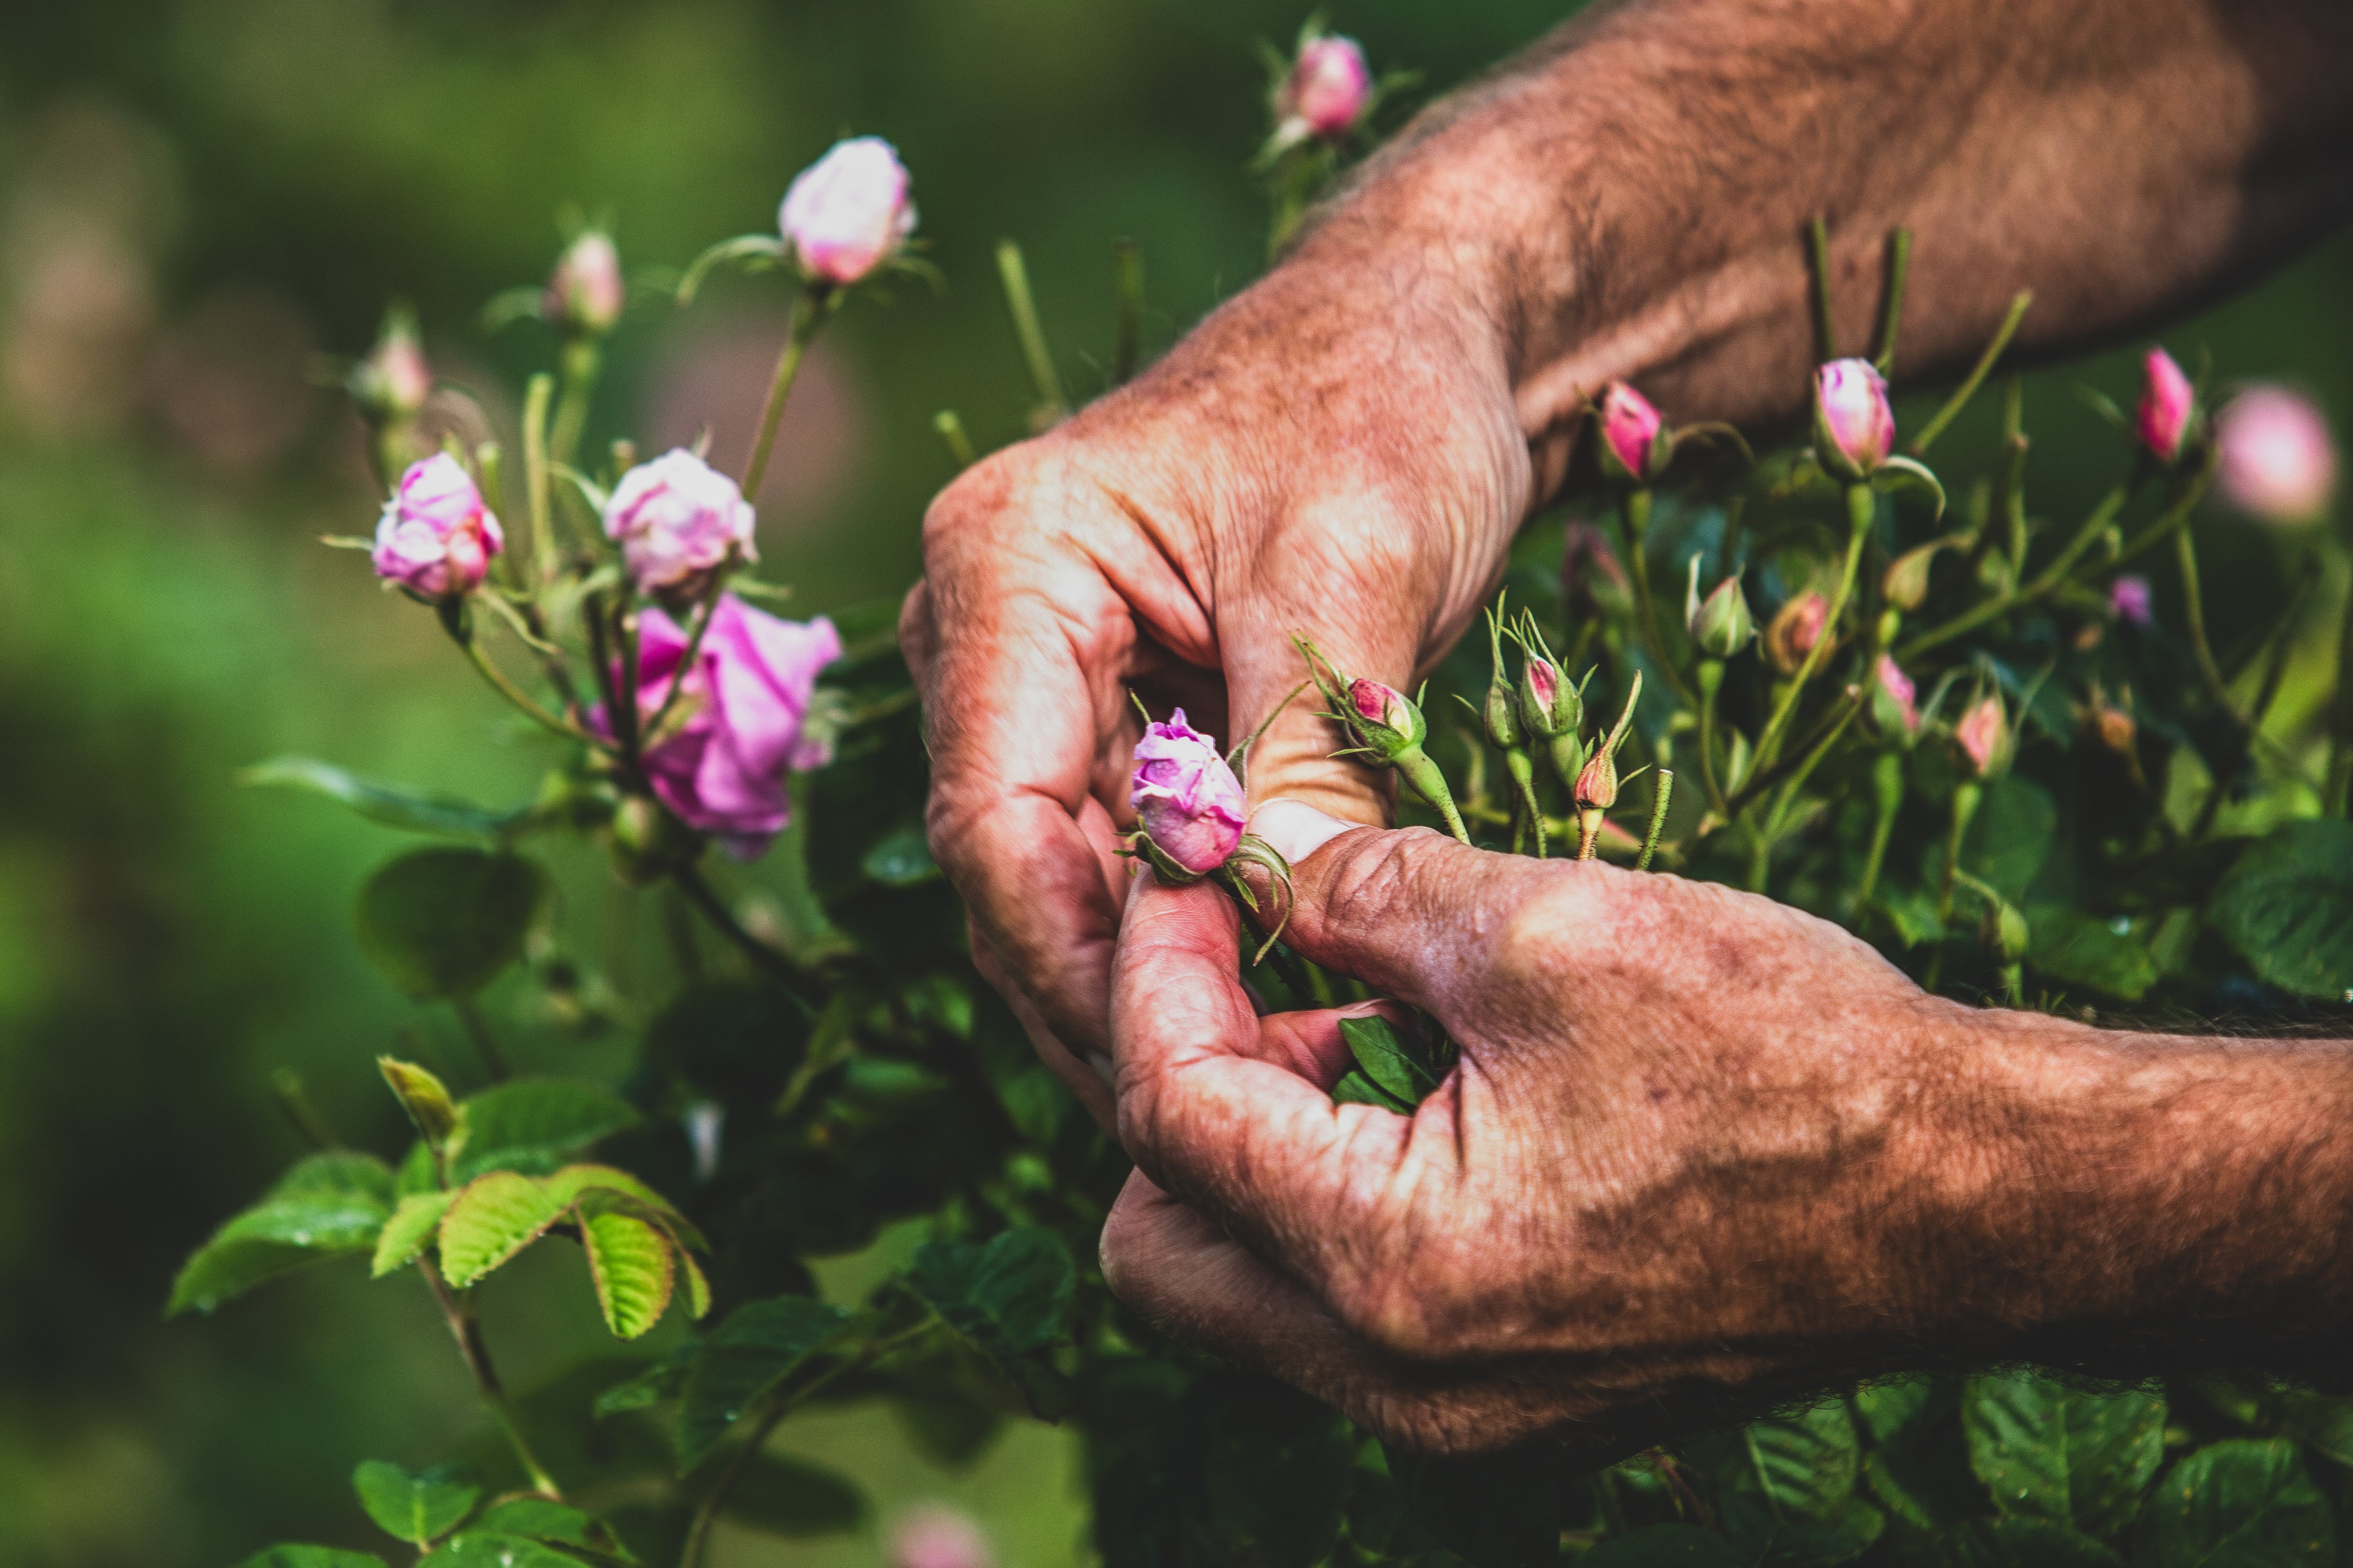 Mountain Rose Herbs proves to be a pacesetter for sustainability in the  personal care industry